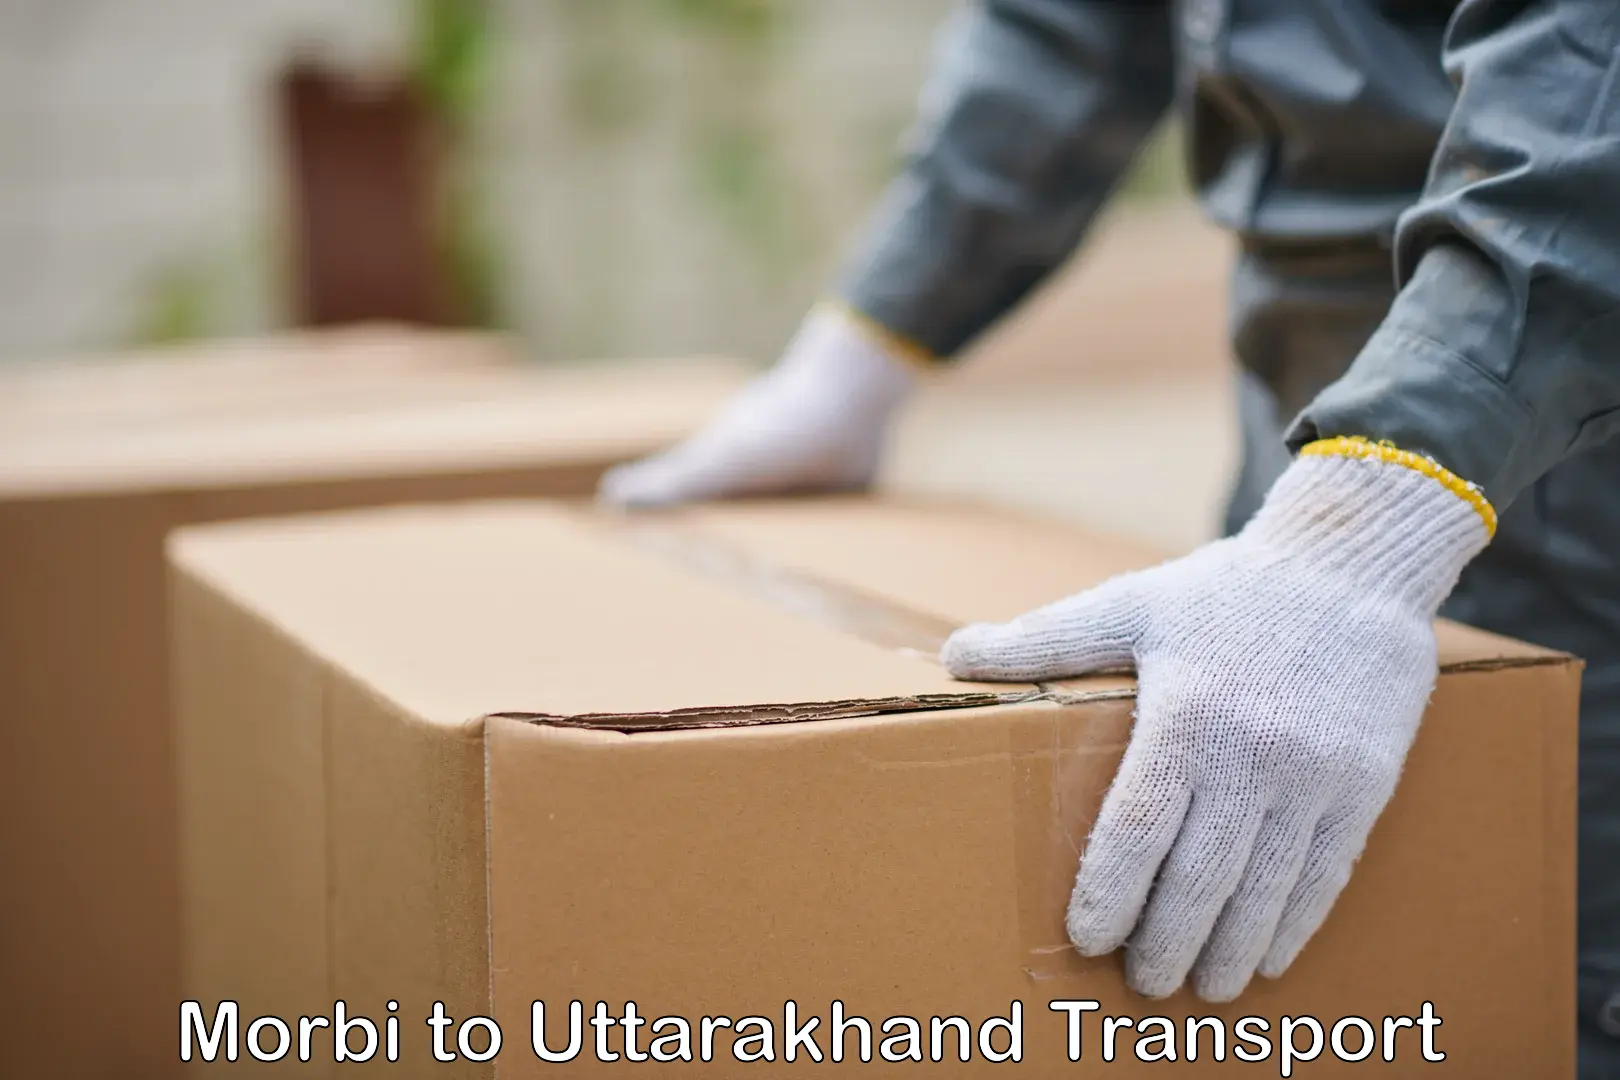 Transport bike from one state to another Morbi to Uttarakhand